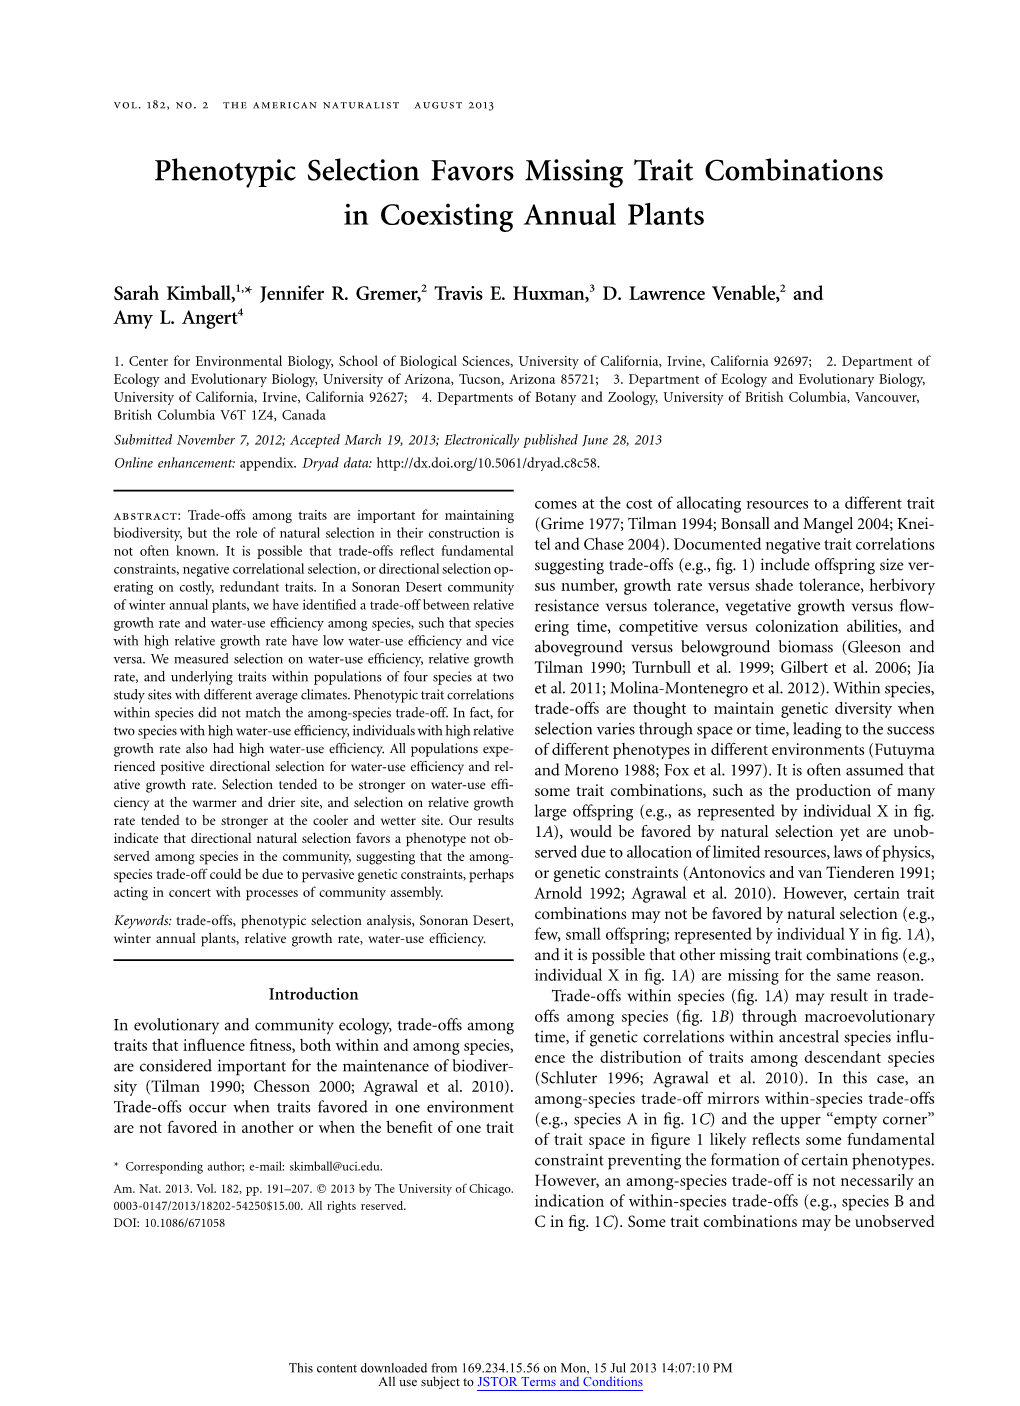 Phenotypic Selection Favors Missing Trait Combinations in Coexisting Annual Plants